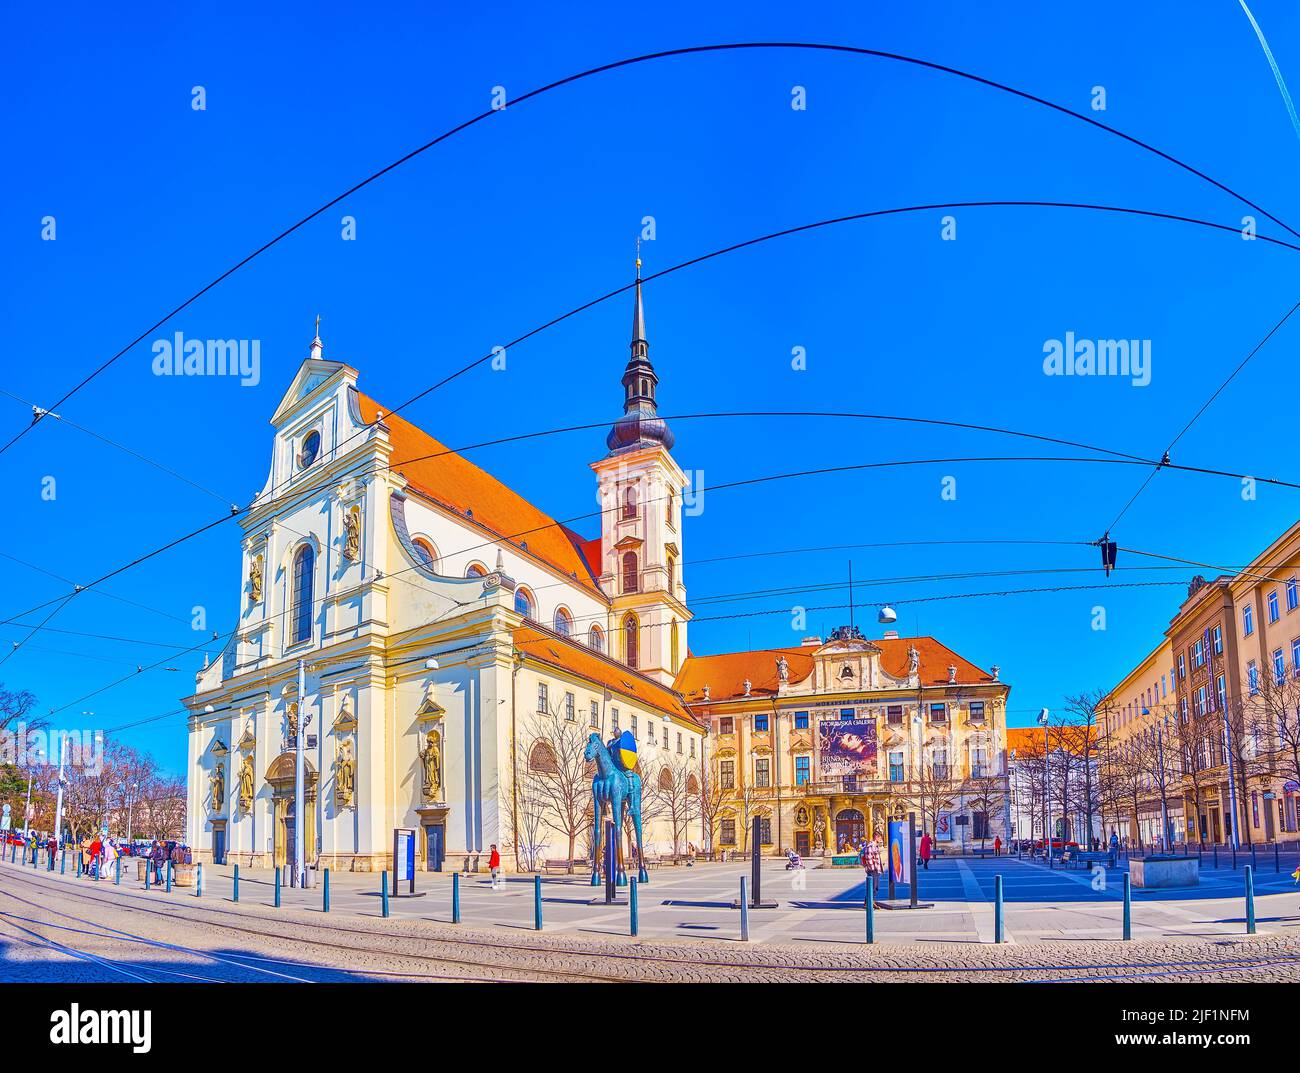 BRNO, CZECH REPUBLIC - MARCH 10, 2022: Panorama of Moravian Square with its main landmark the Church of St. Thomas with high bel ltower, on March 10 i Stock Photo